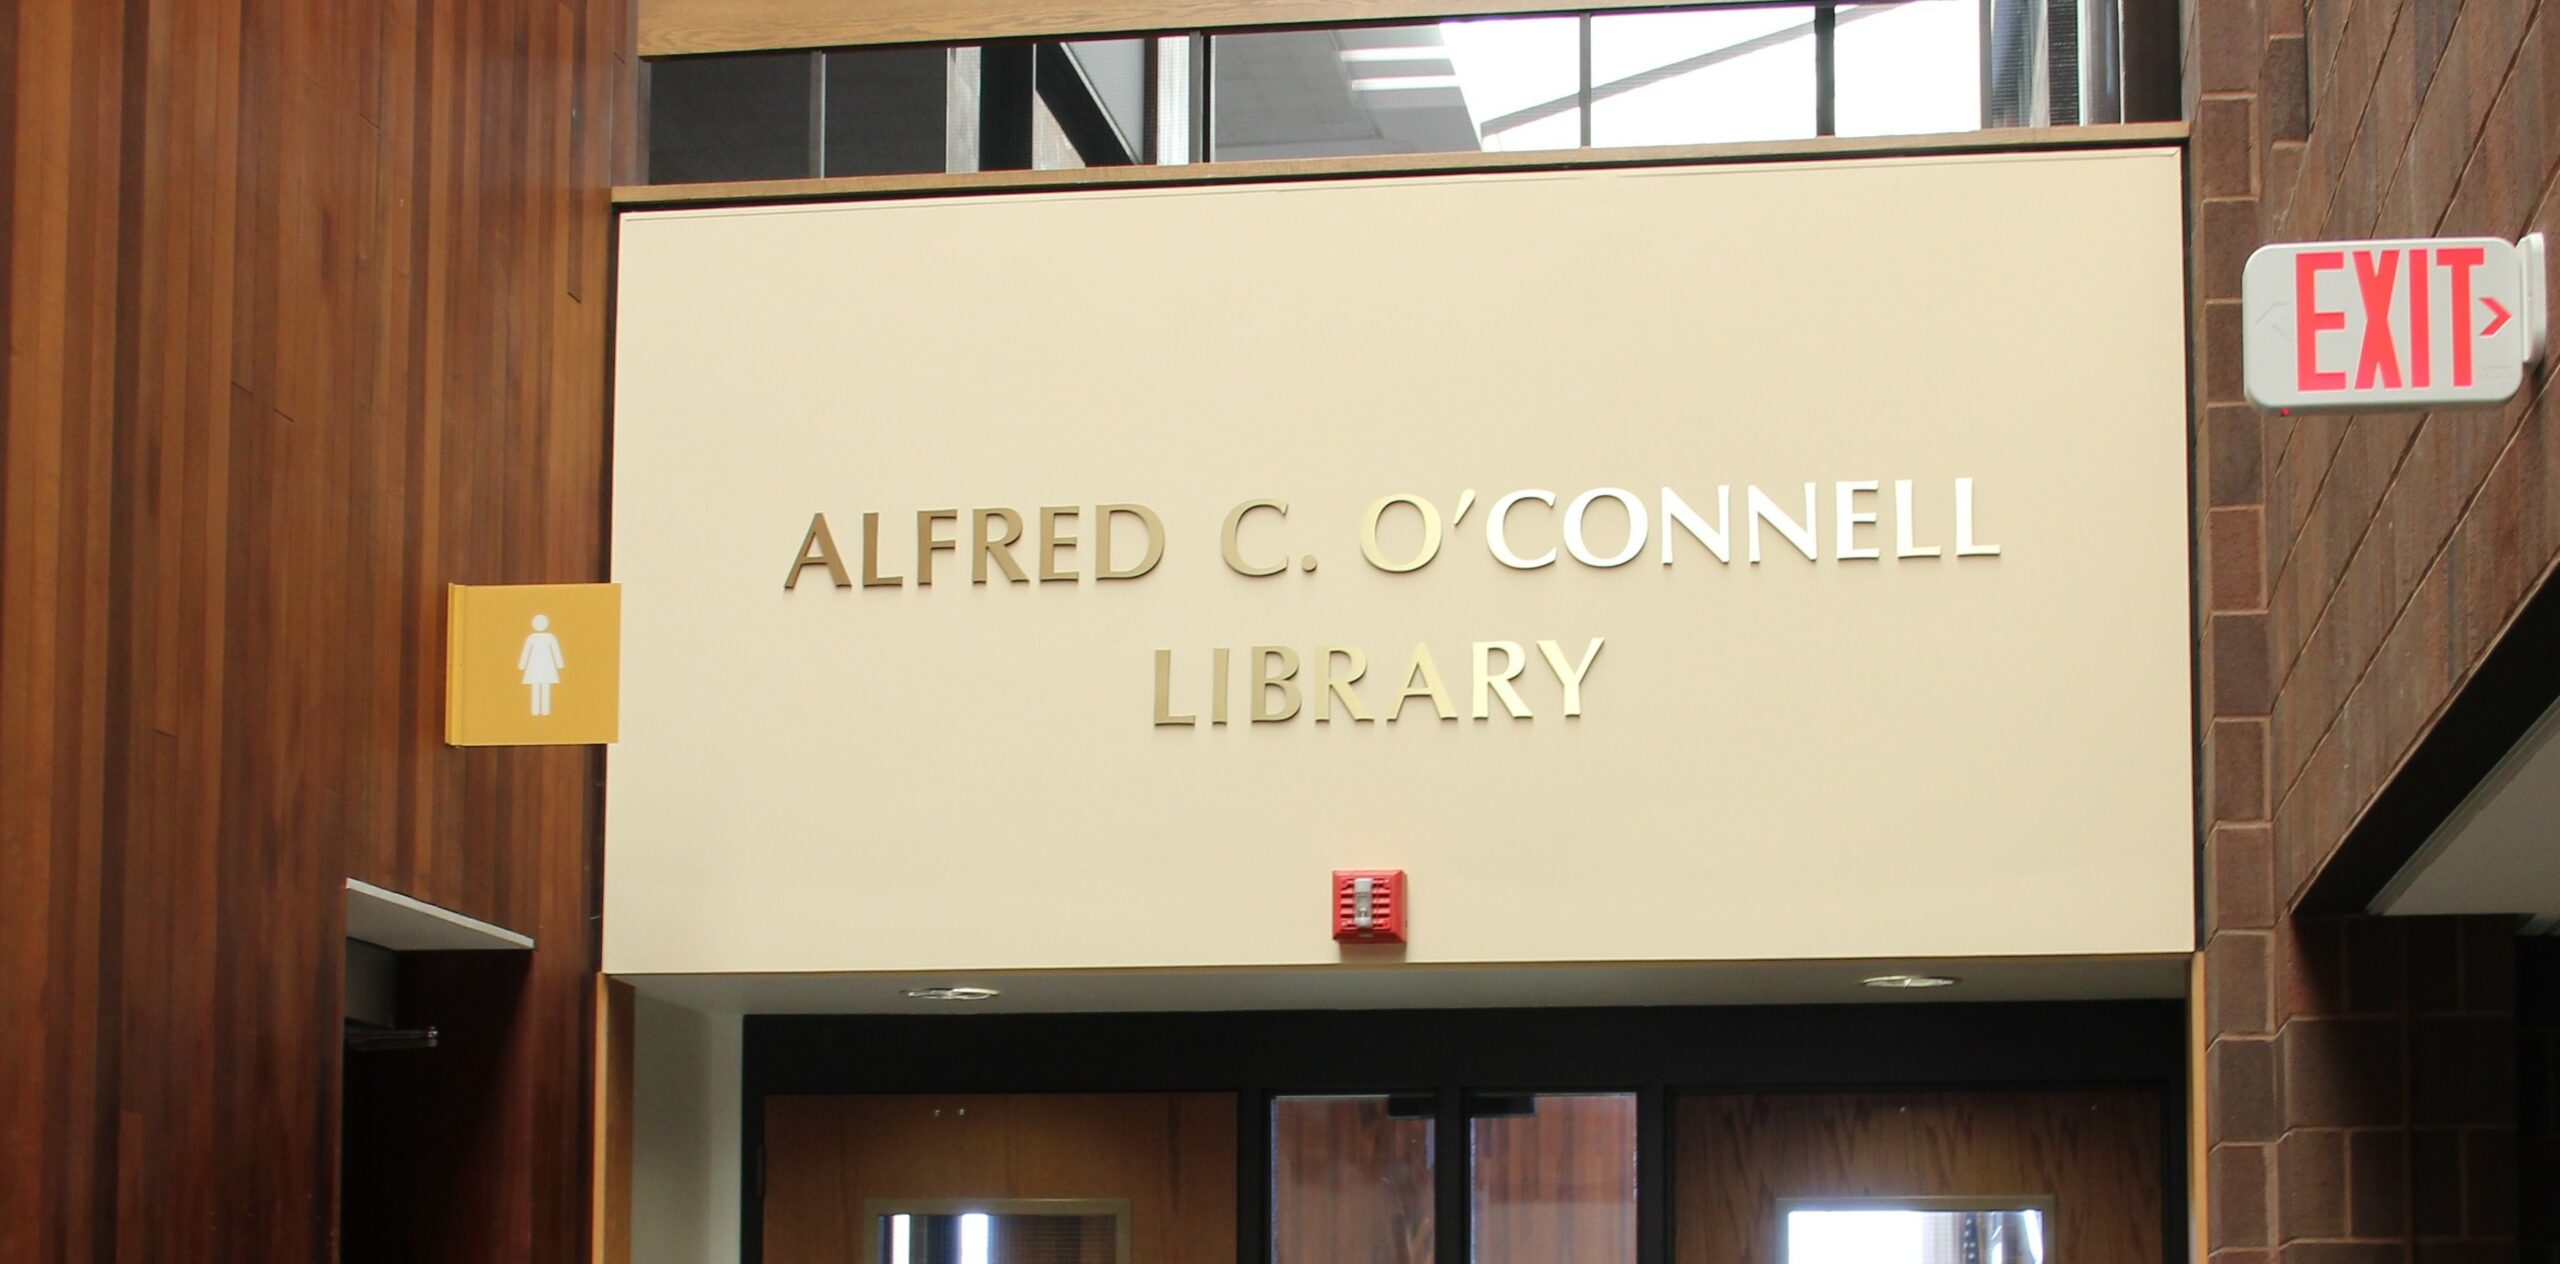 Image of Alfred C. O'Connell Library, Genesee Community College